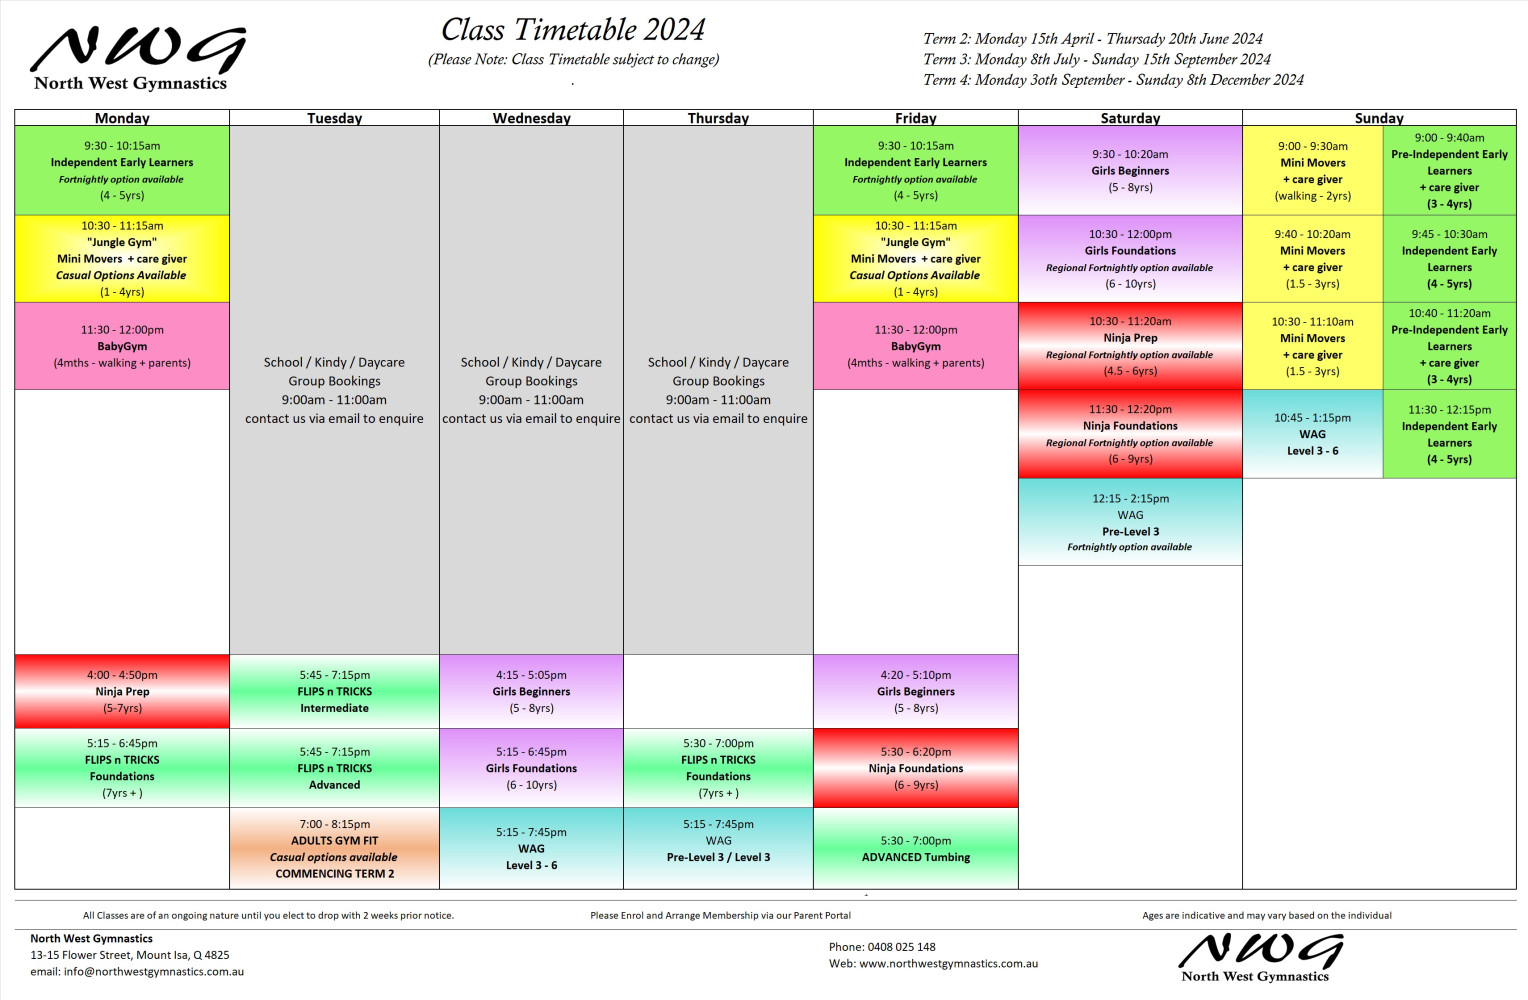 Preliminary Class Timetable NWG Mount Isa